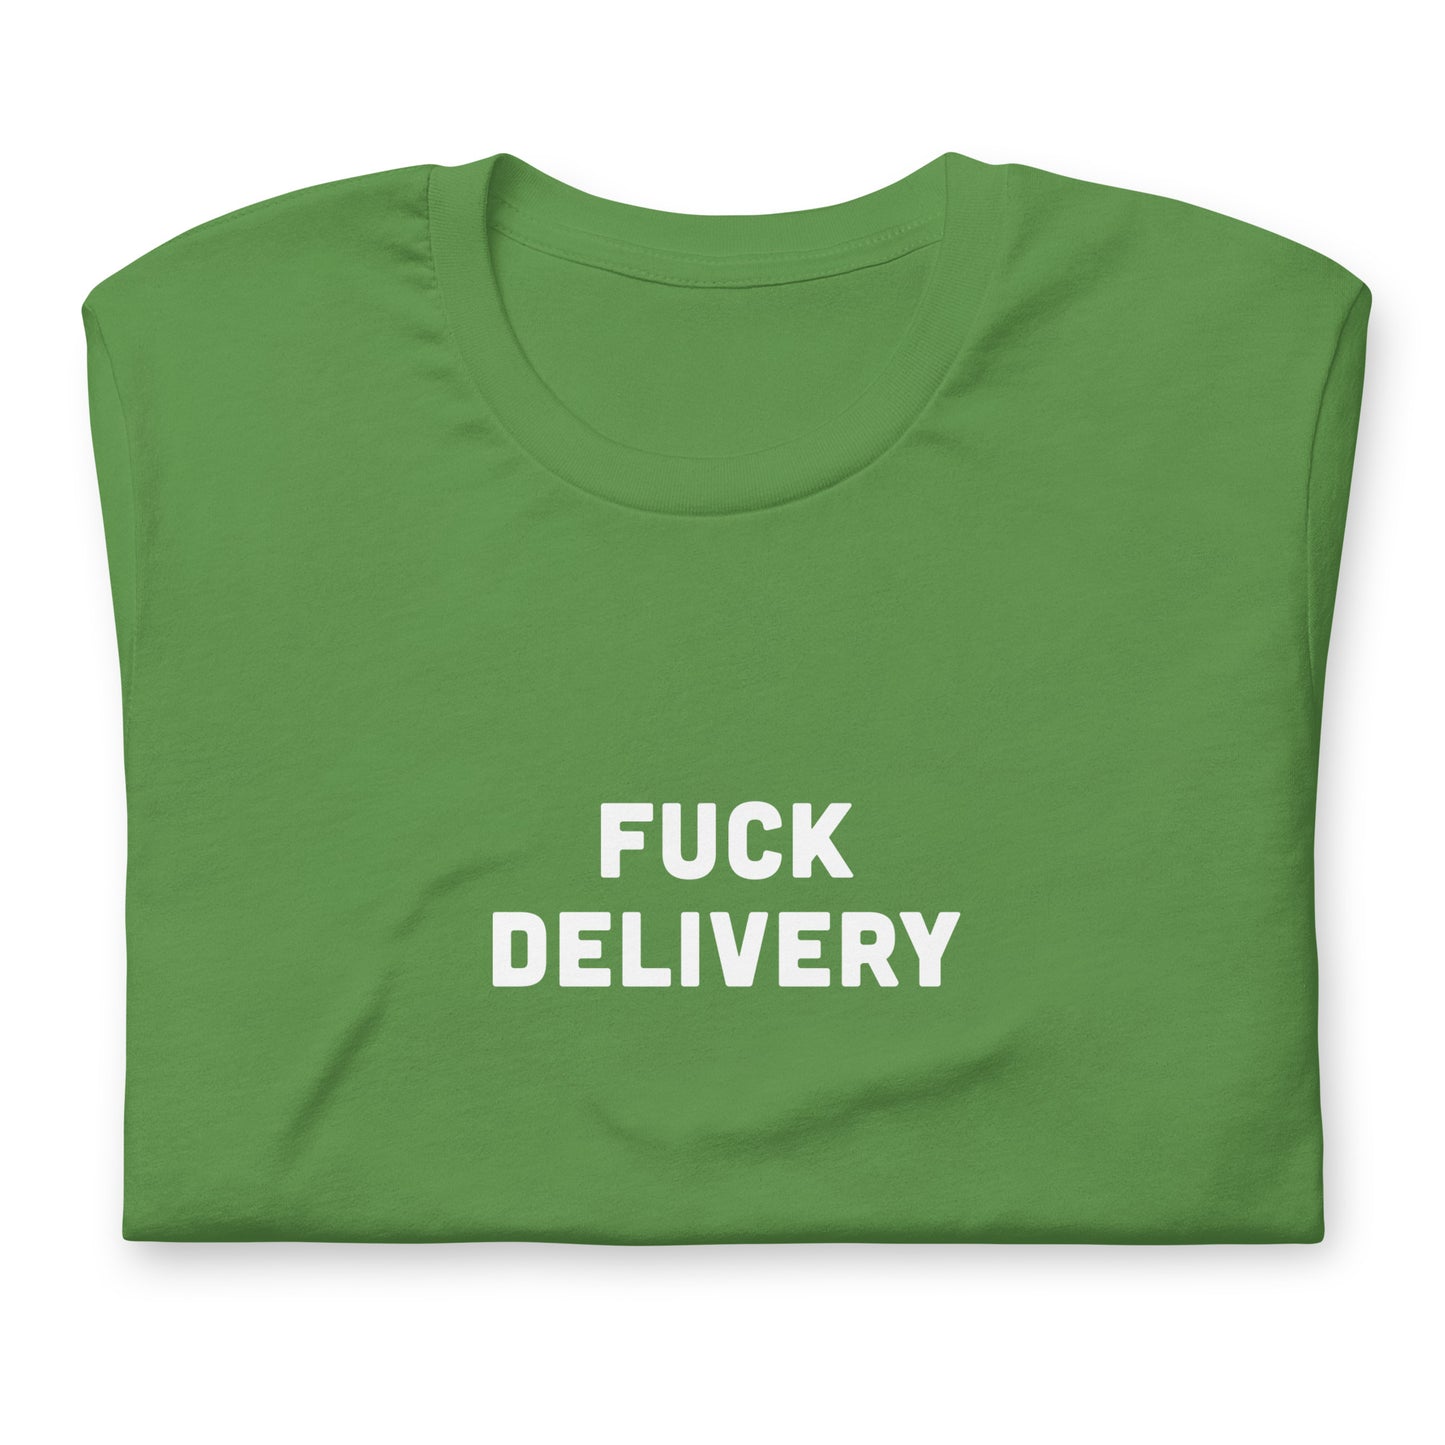 Fuck Delivery T-Shirt Size M Color Forest